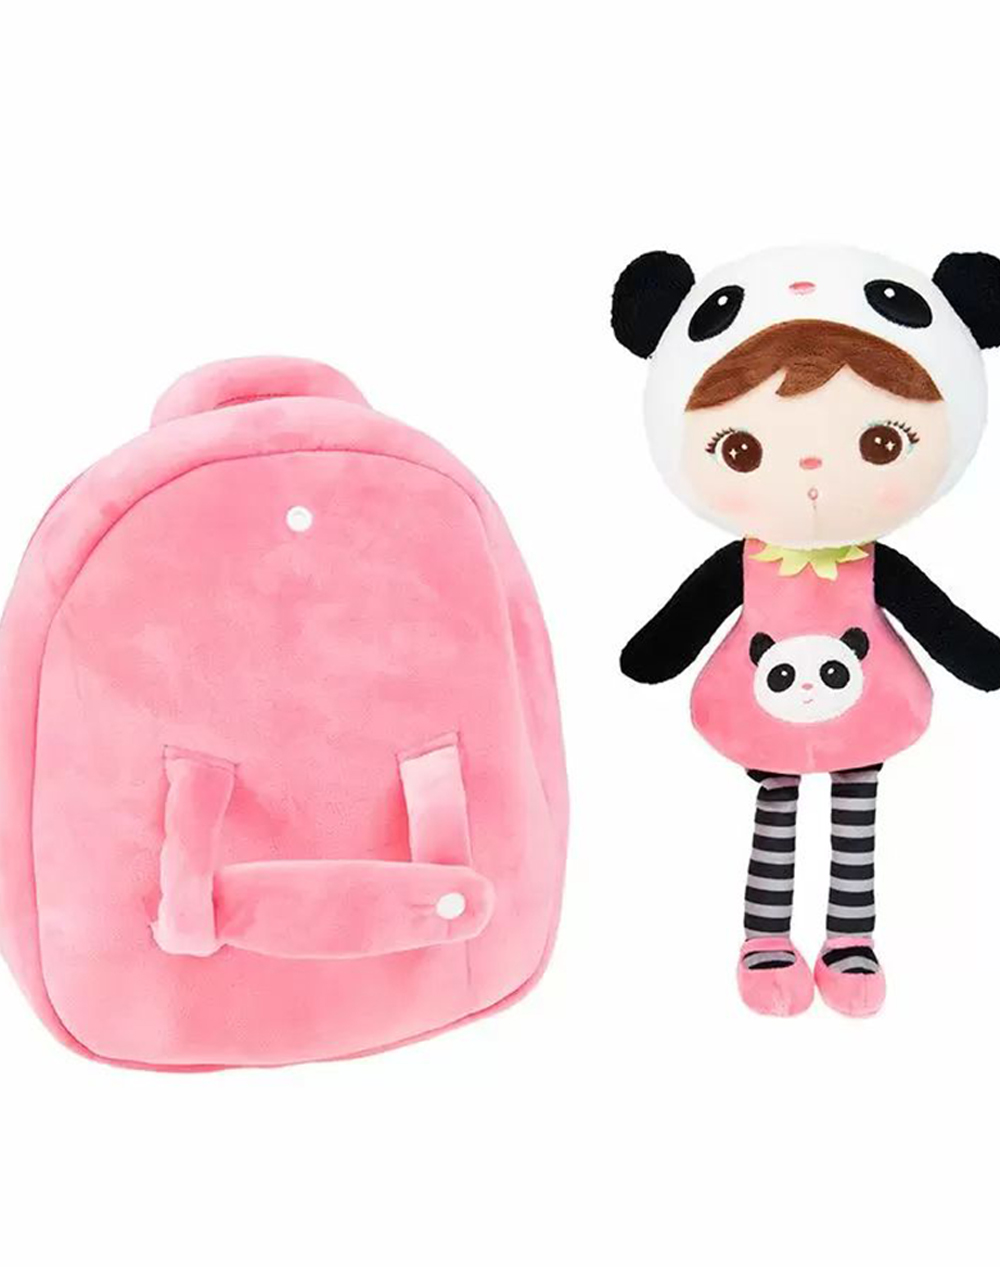 COOL CLUB Backpack36 + Months (Dimensions: 28 x 25 cm)